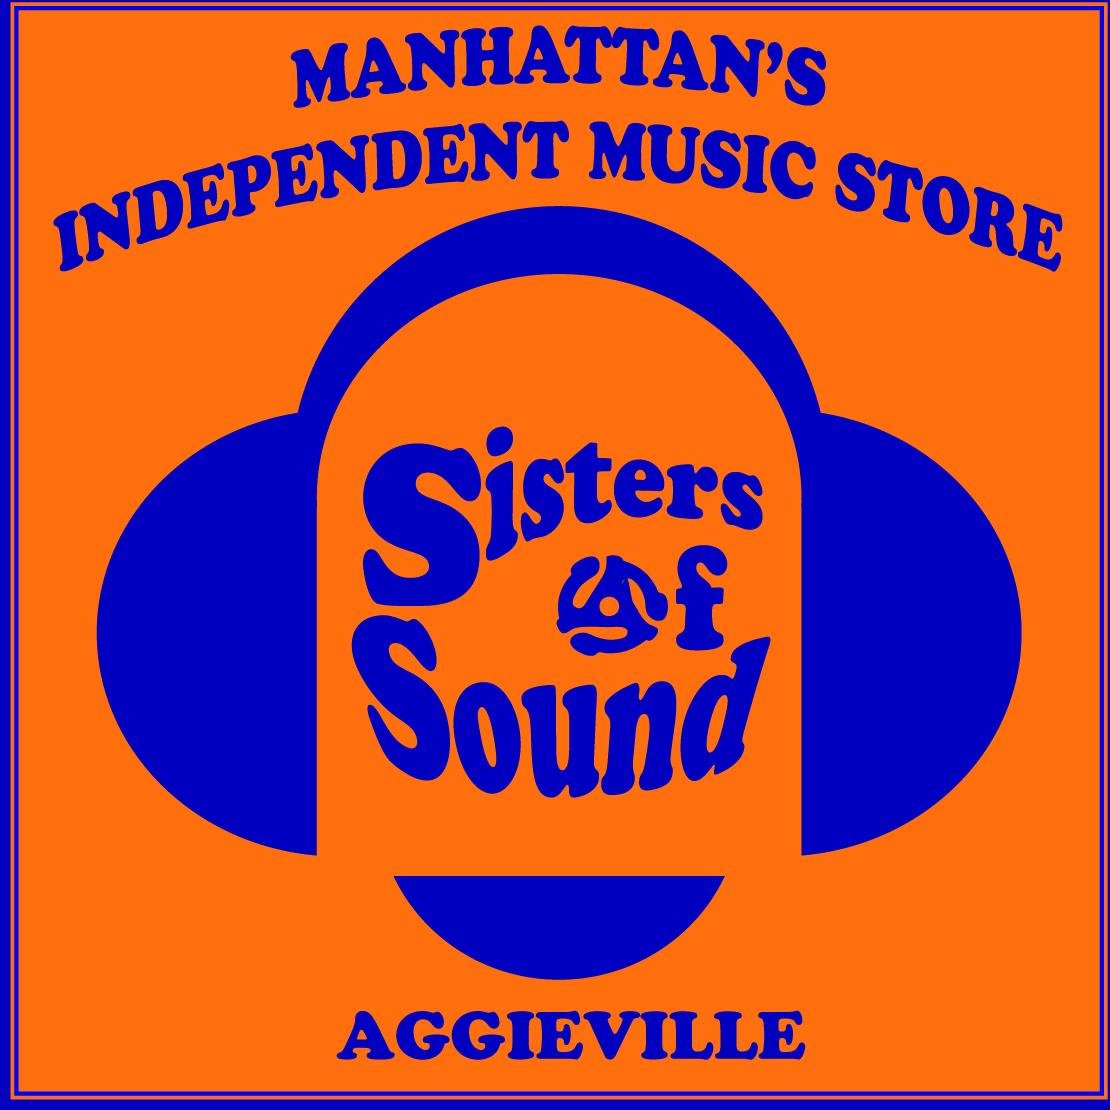 You already love us; you just don't know it yet. We're a music store, so we have new & used vinyl, CDs, shirts, DVDs, all that jazz (lots of jazz, actually).